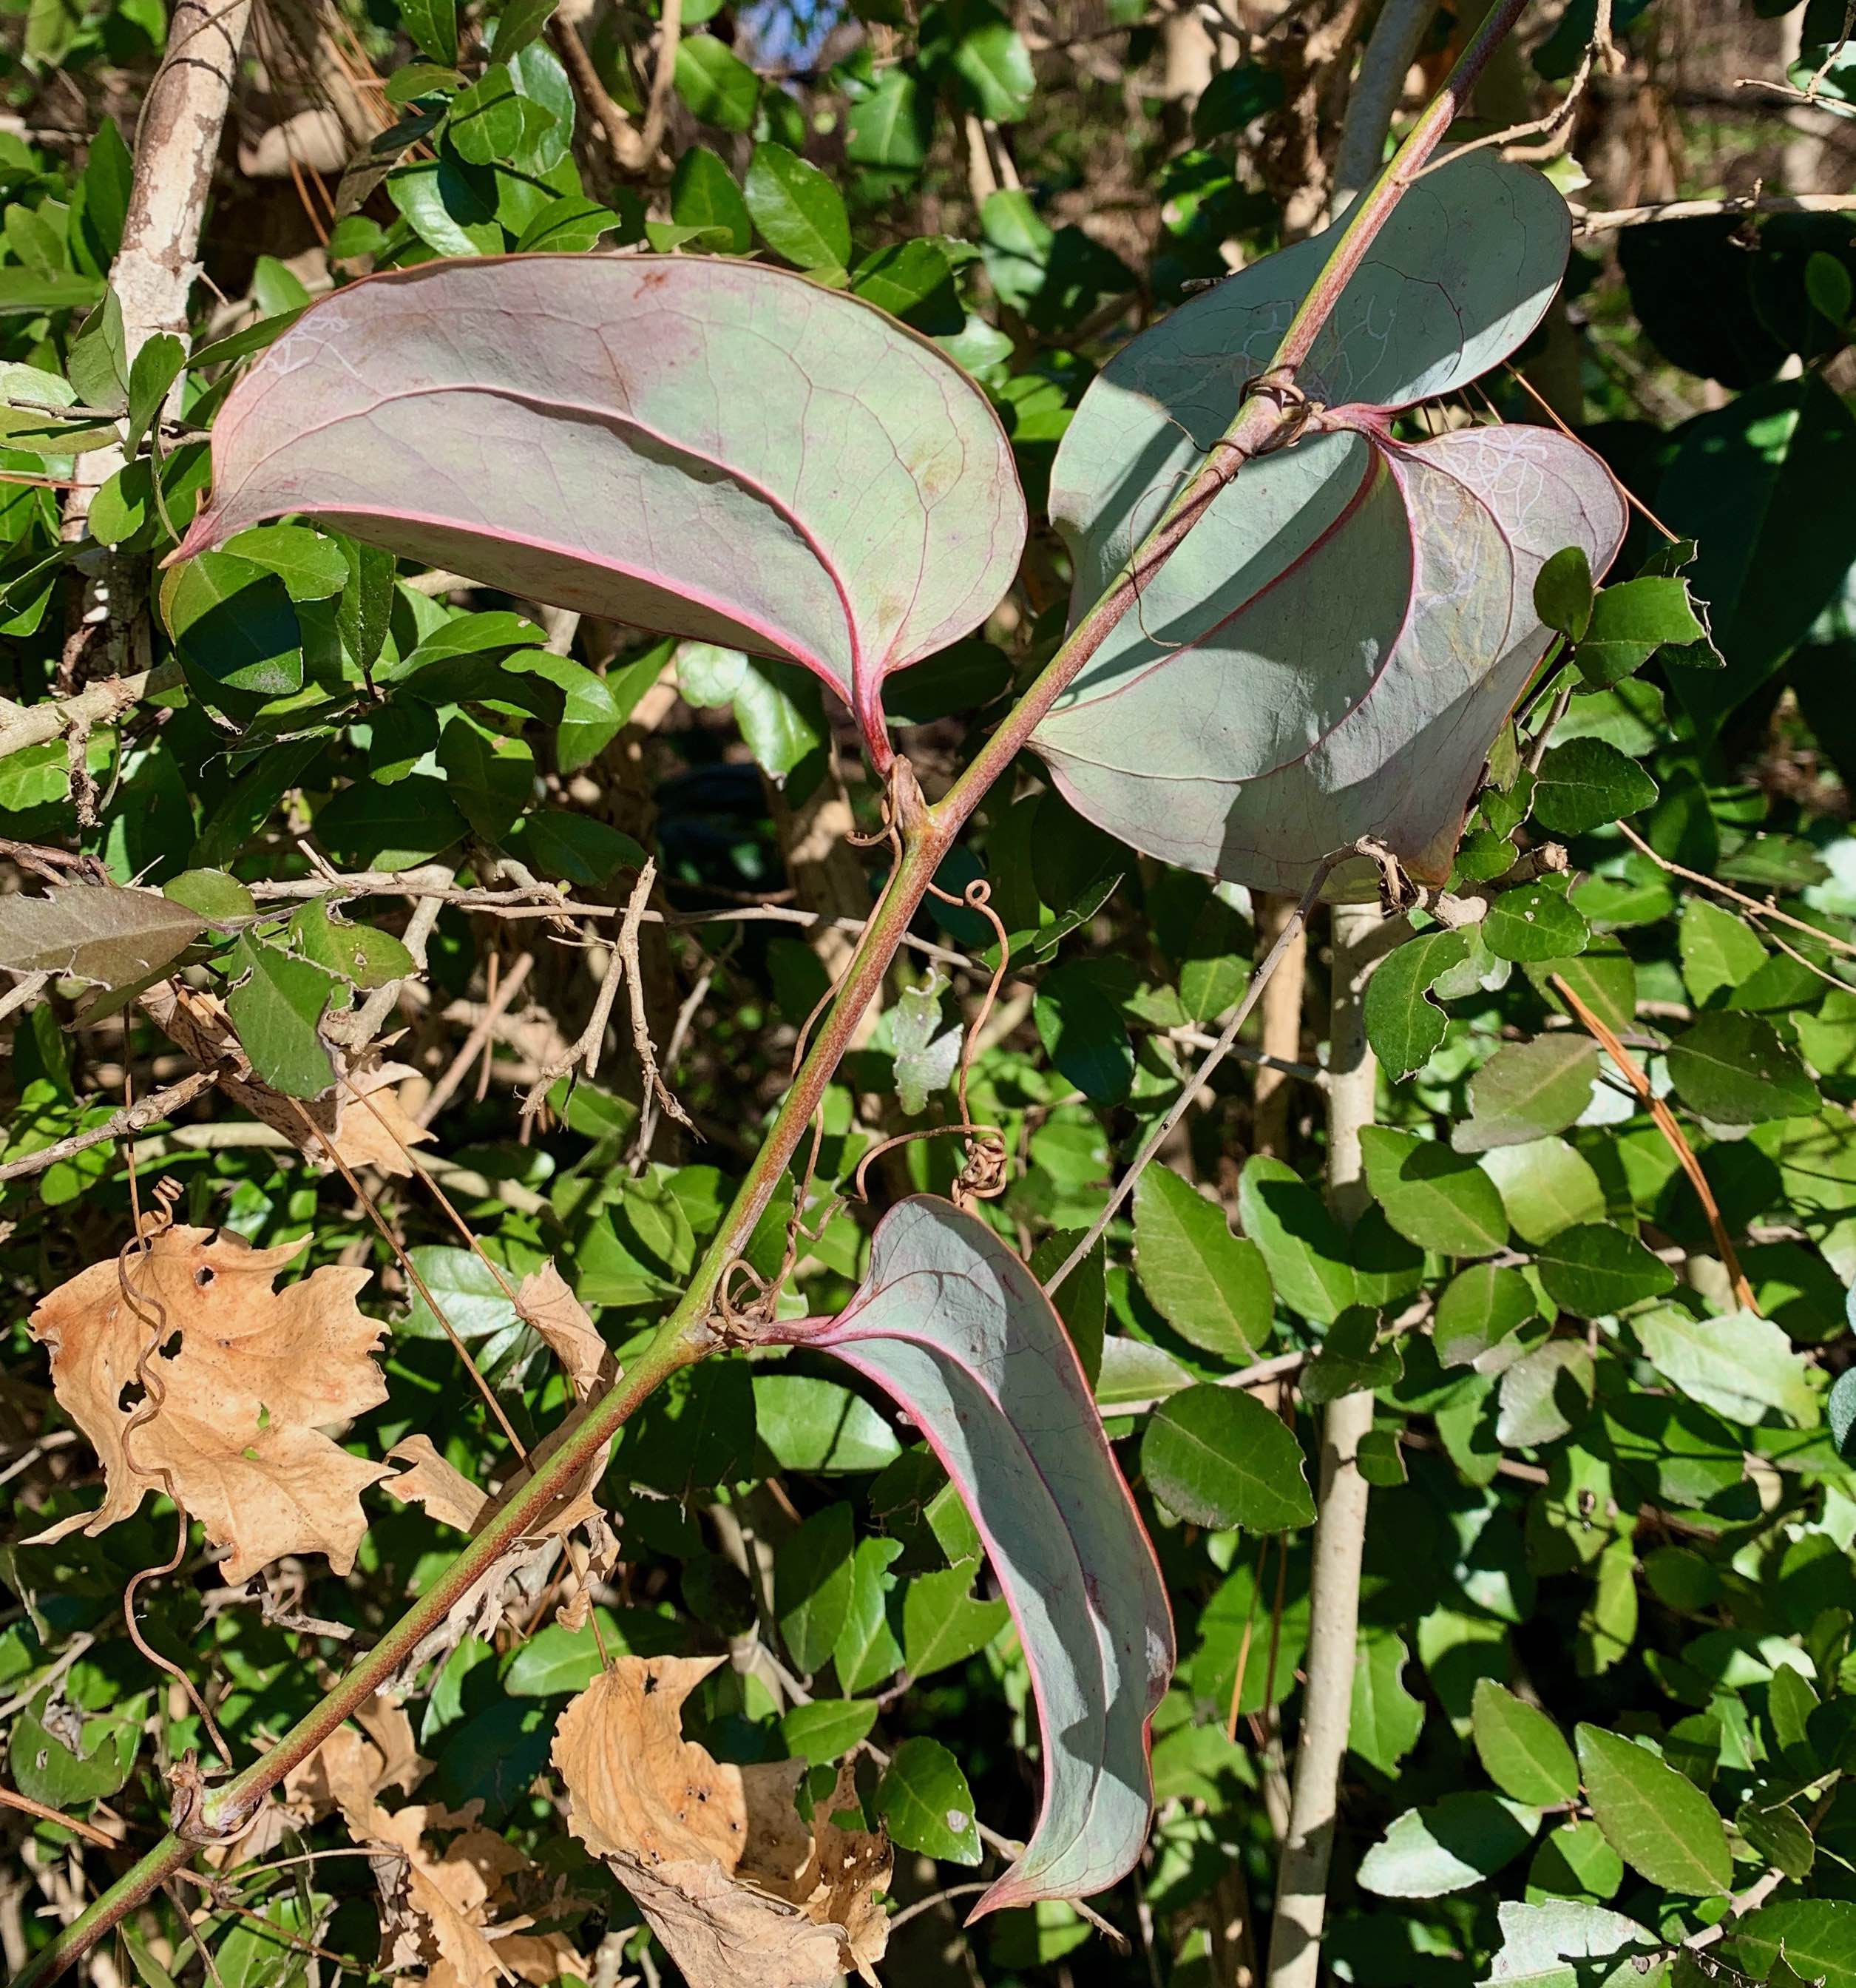 The Scientific Name is Smilax glauca. You will likely hear them called Whiteleaf Greenbriar, Wild Sarsaparilla, Sawbriar, Glaucous-leaved Greenbriar. This picture shows the Whitened (glaucous) lower leaf surfaces of Smilax glauca